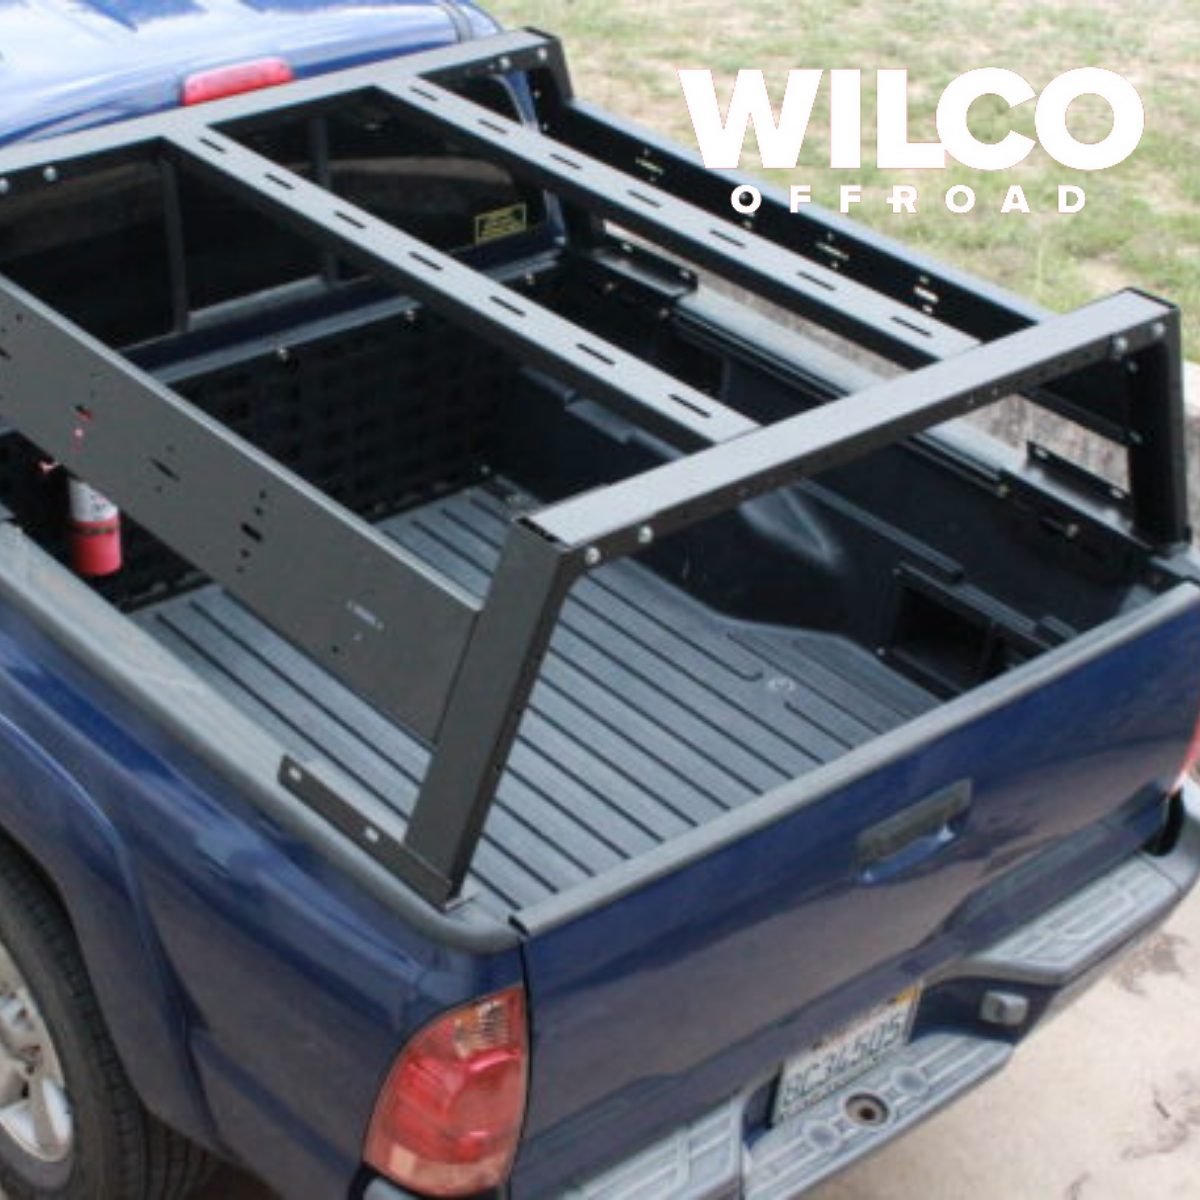 The Wilco Base Camp Rack